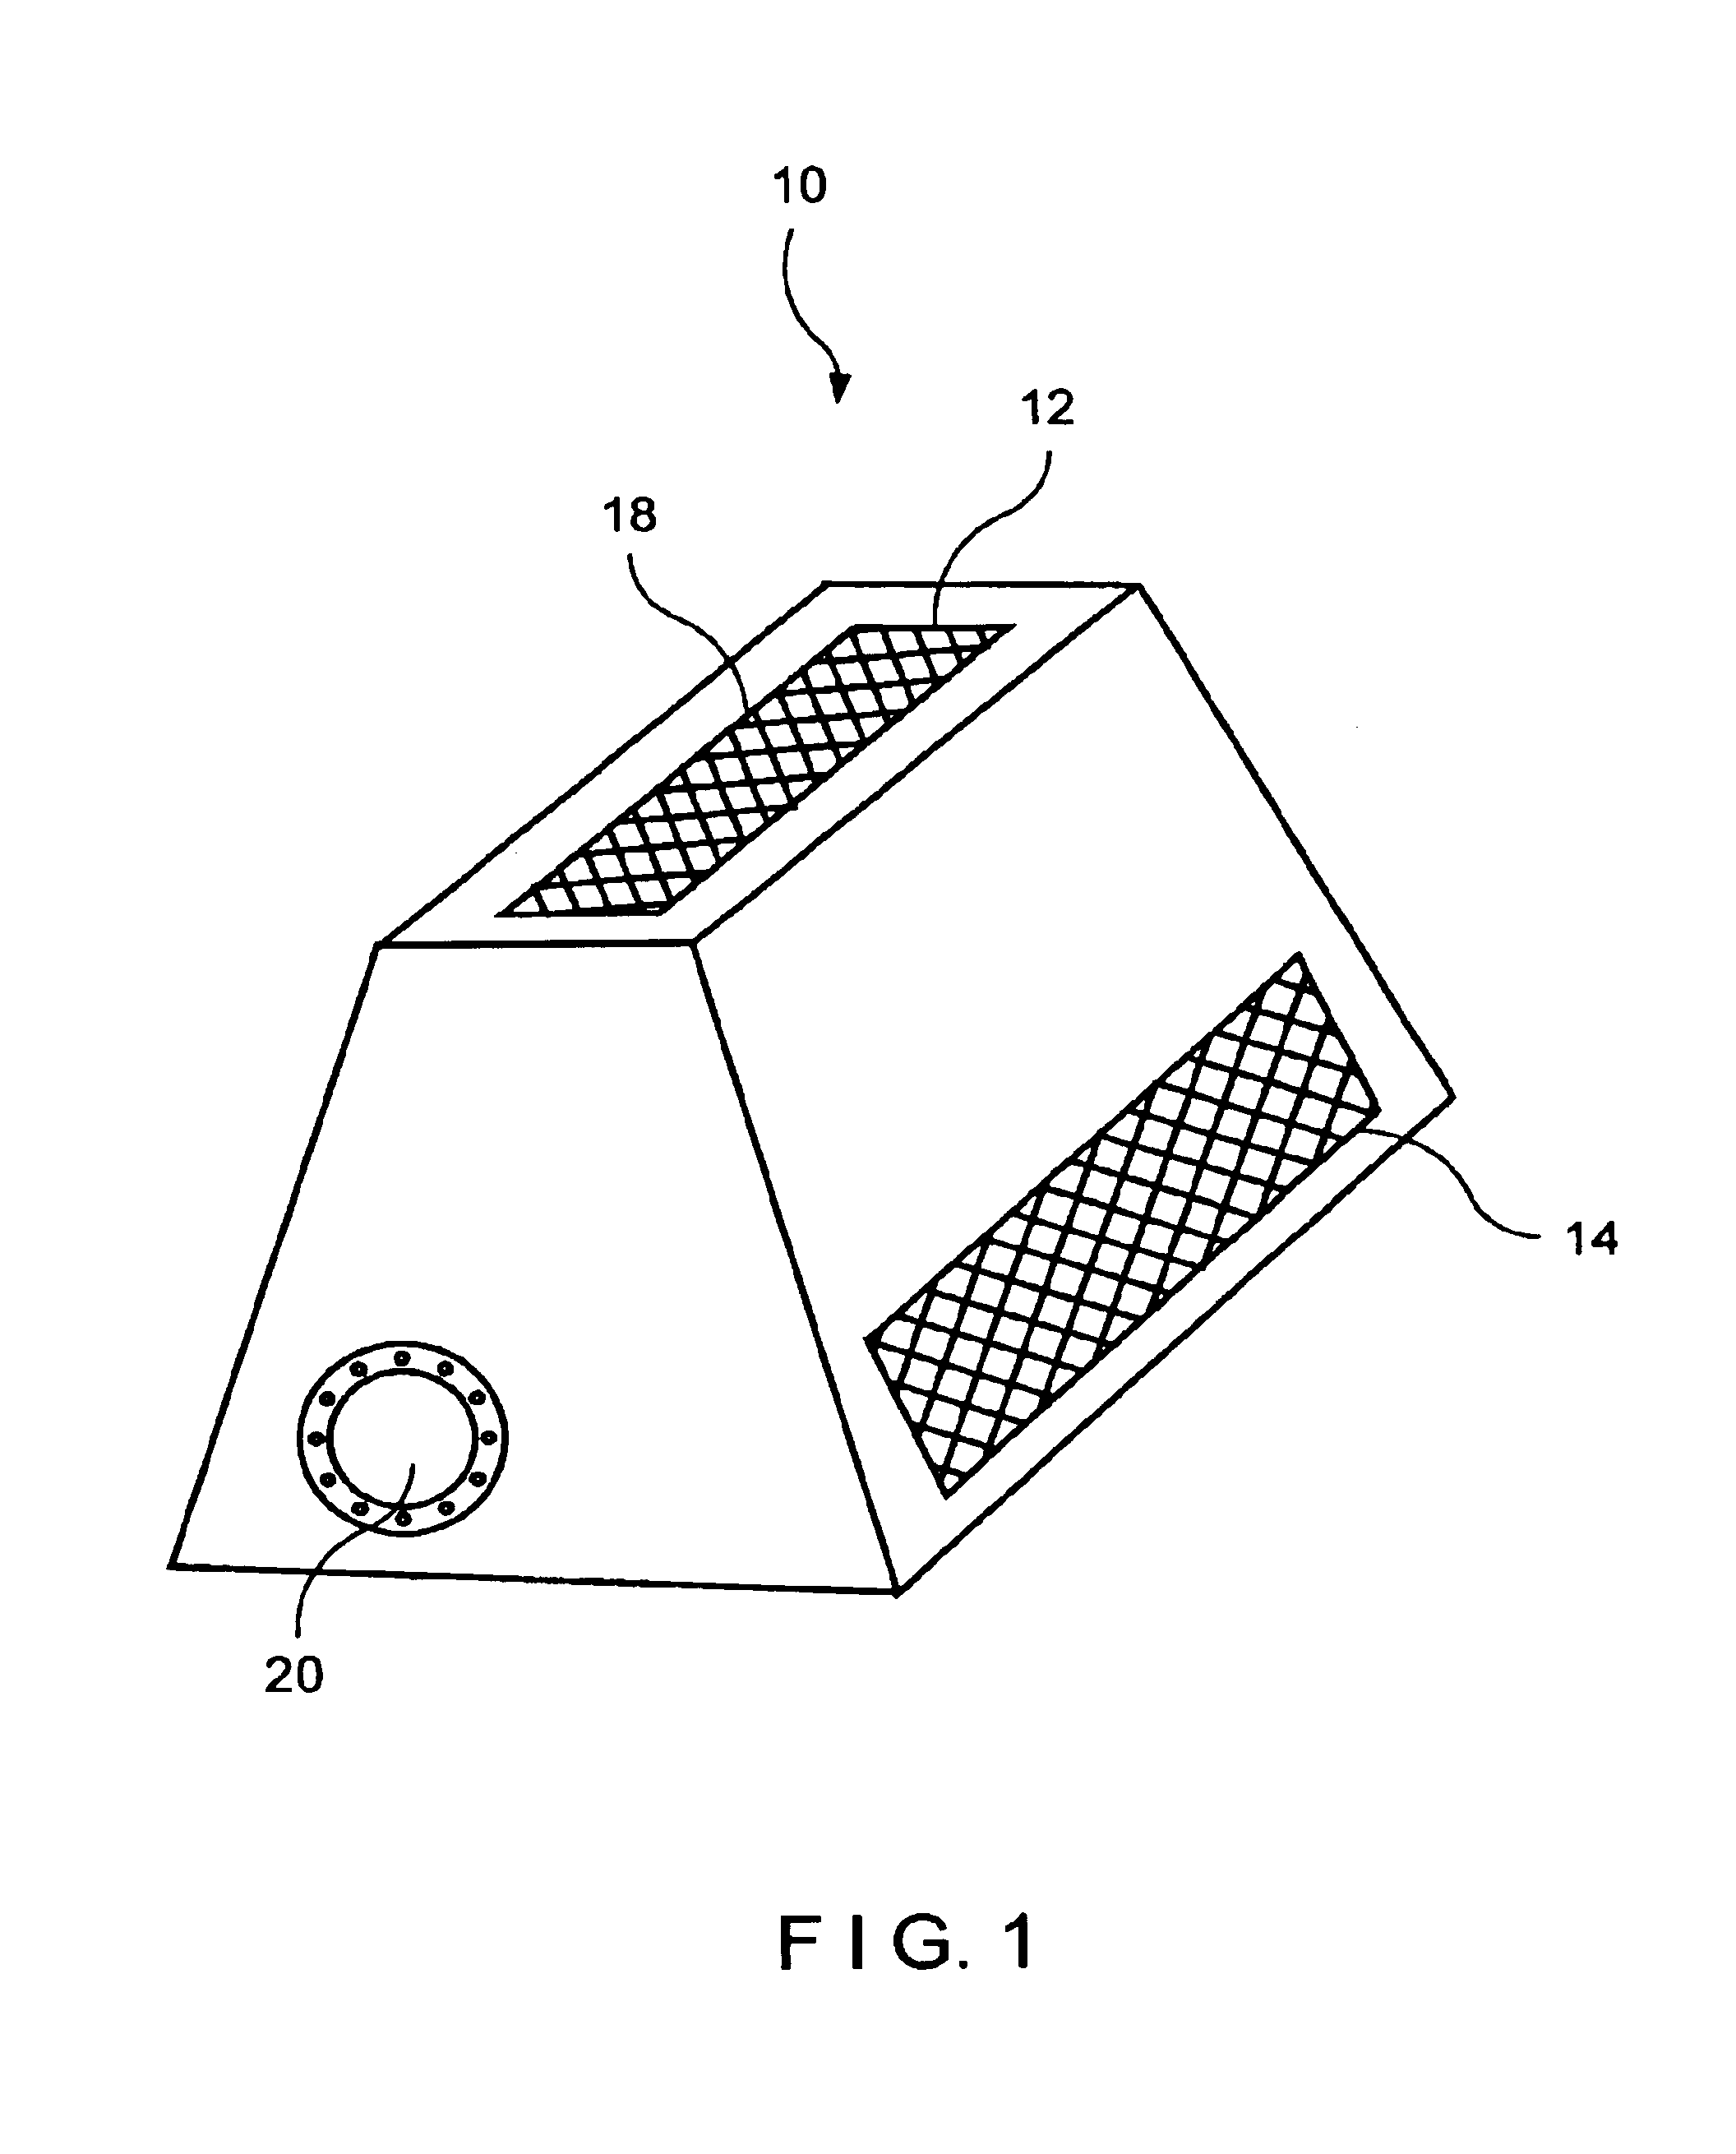 Flow control suction barrier apparatus and system